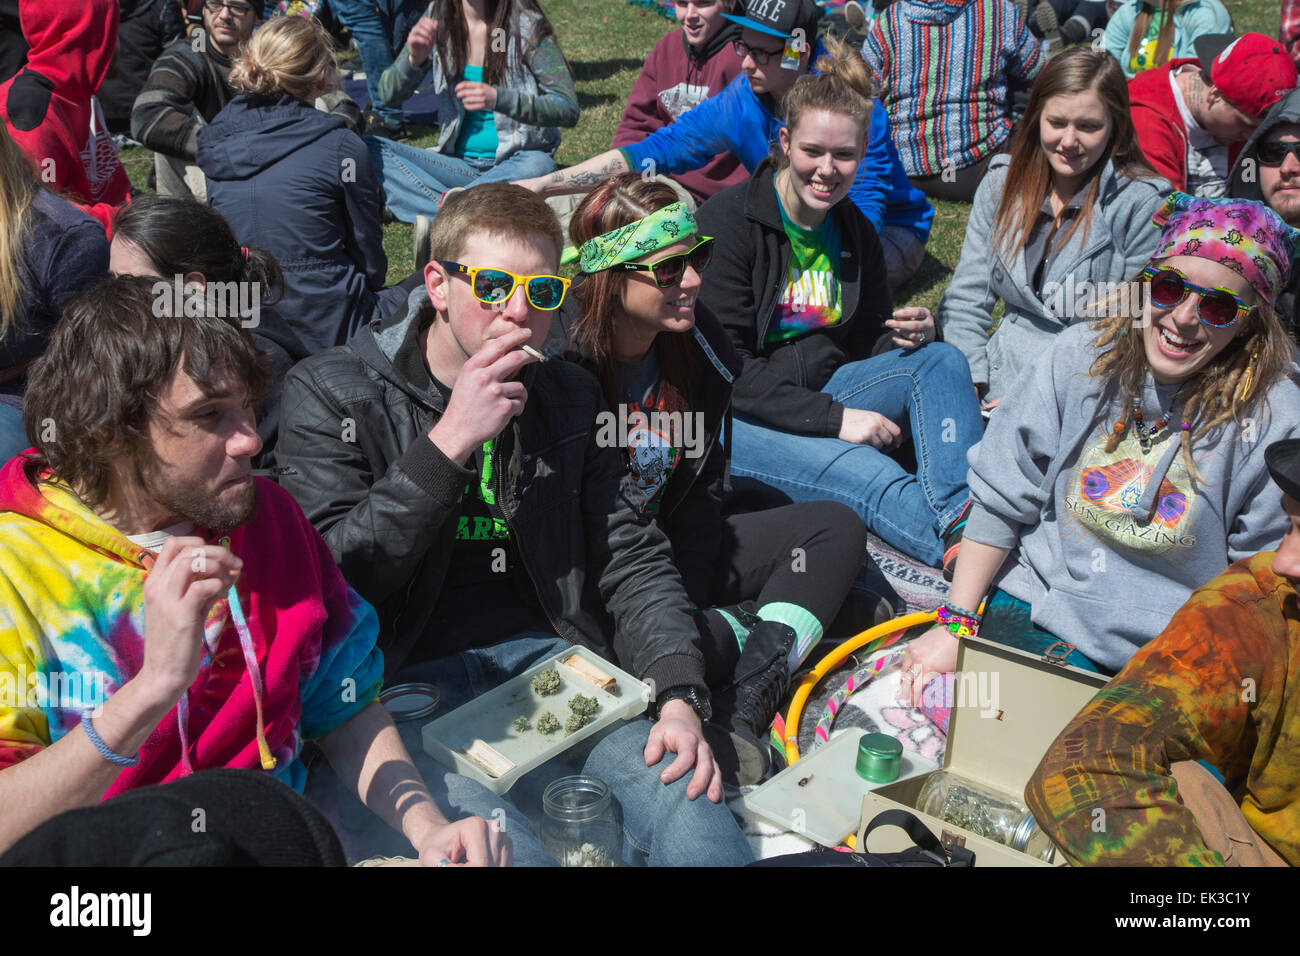 The annual Hash Bash at the University of Michigan, where a lot of marijuana is smoked and speakers call for its legalization. Stock Photo